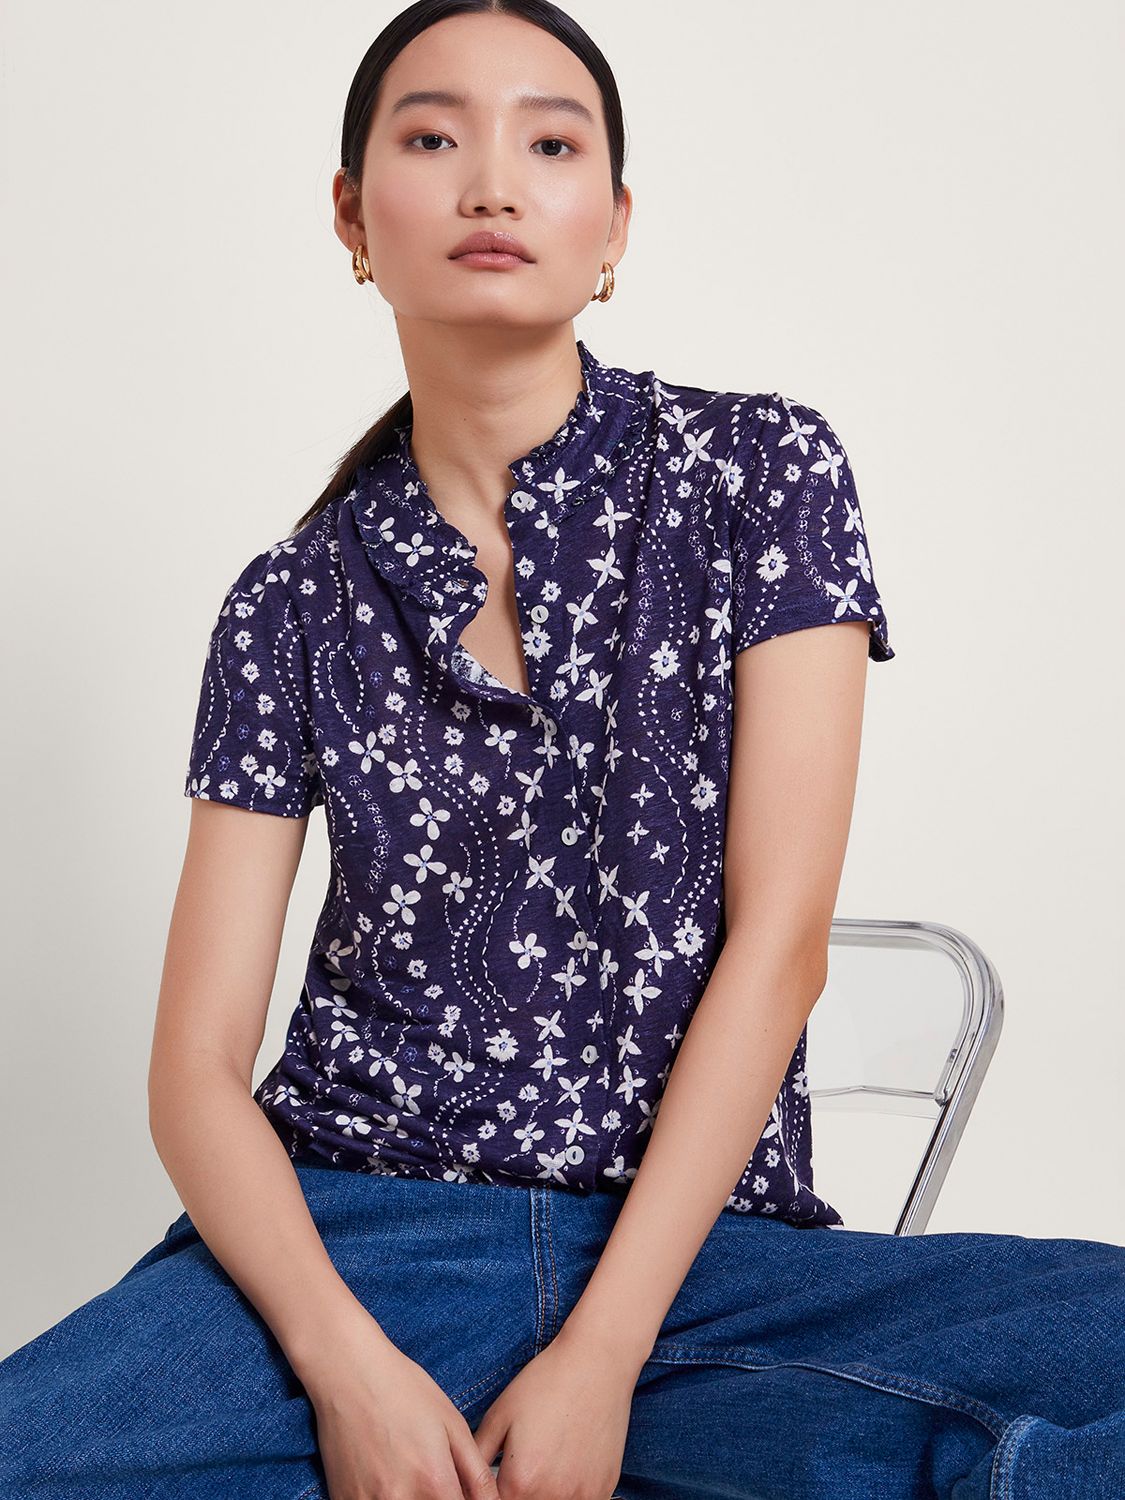 Monsoon Serena Floral Print Linen Top, Navy/White, S